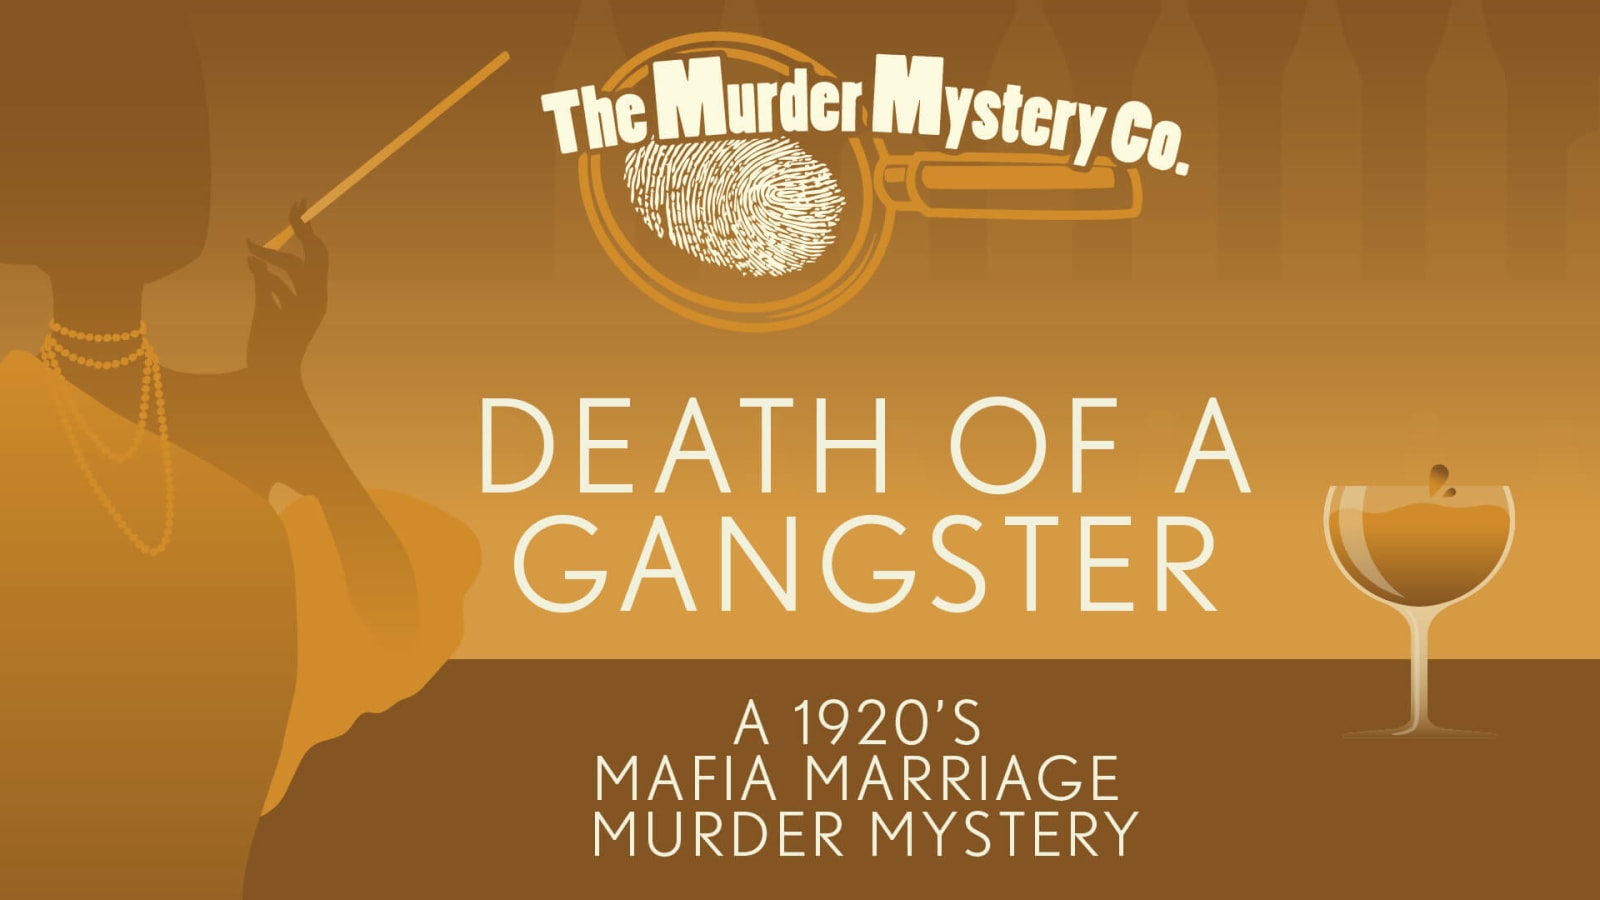 Murder Mystery Co. Presents: “Death of a Gangster